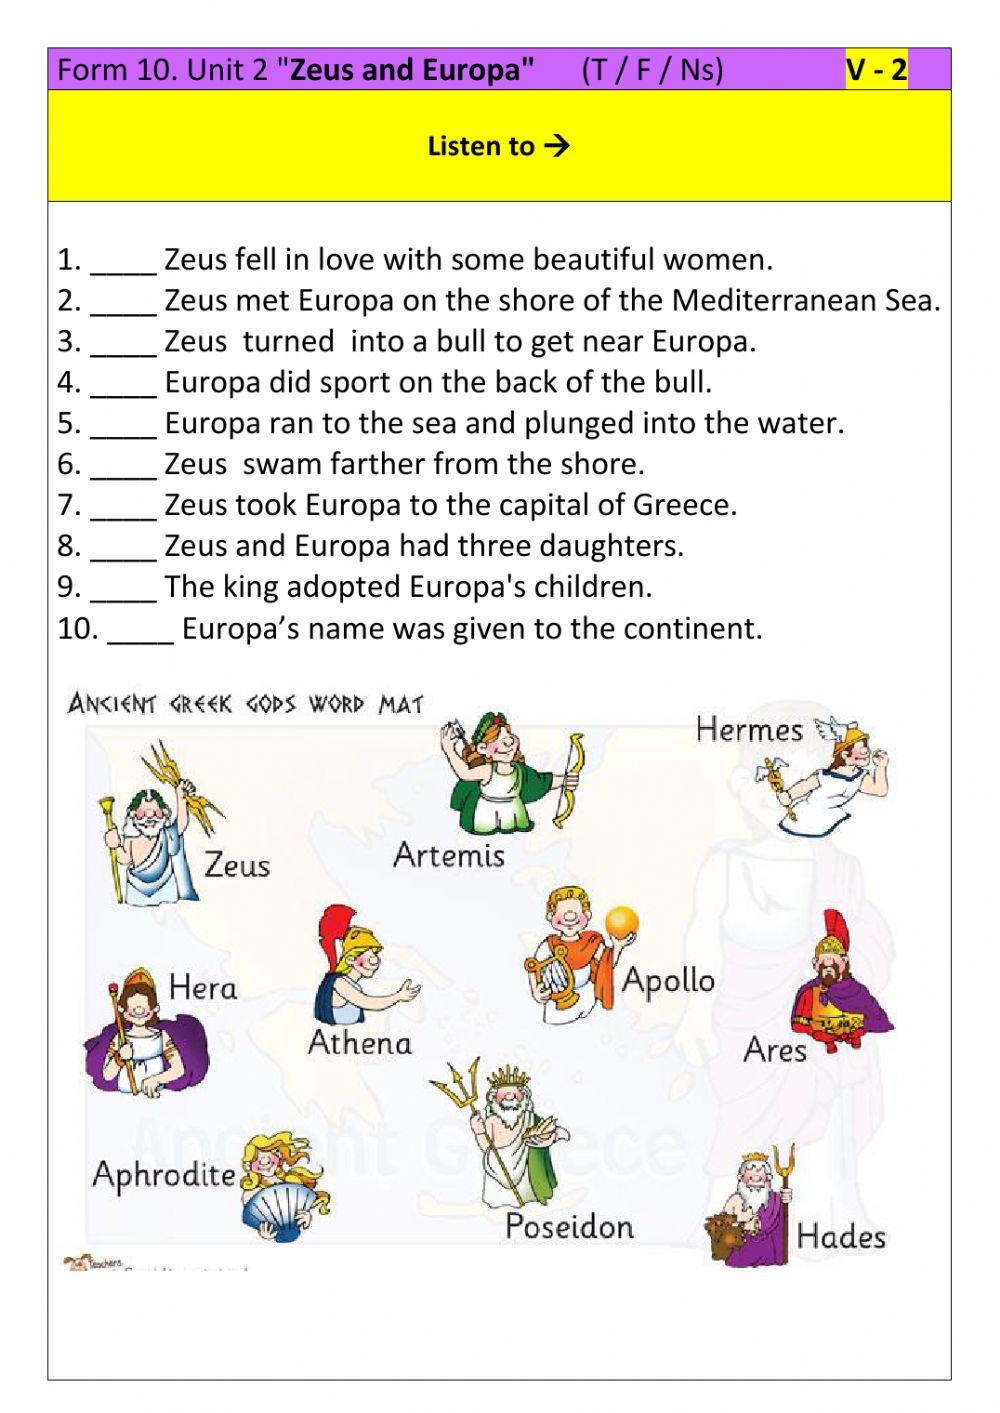 Form 10. Unit 2. Listening -Zeus and Europa-. V - 2